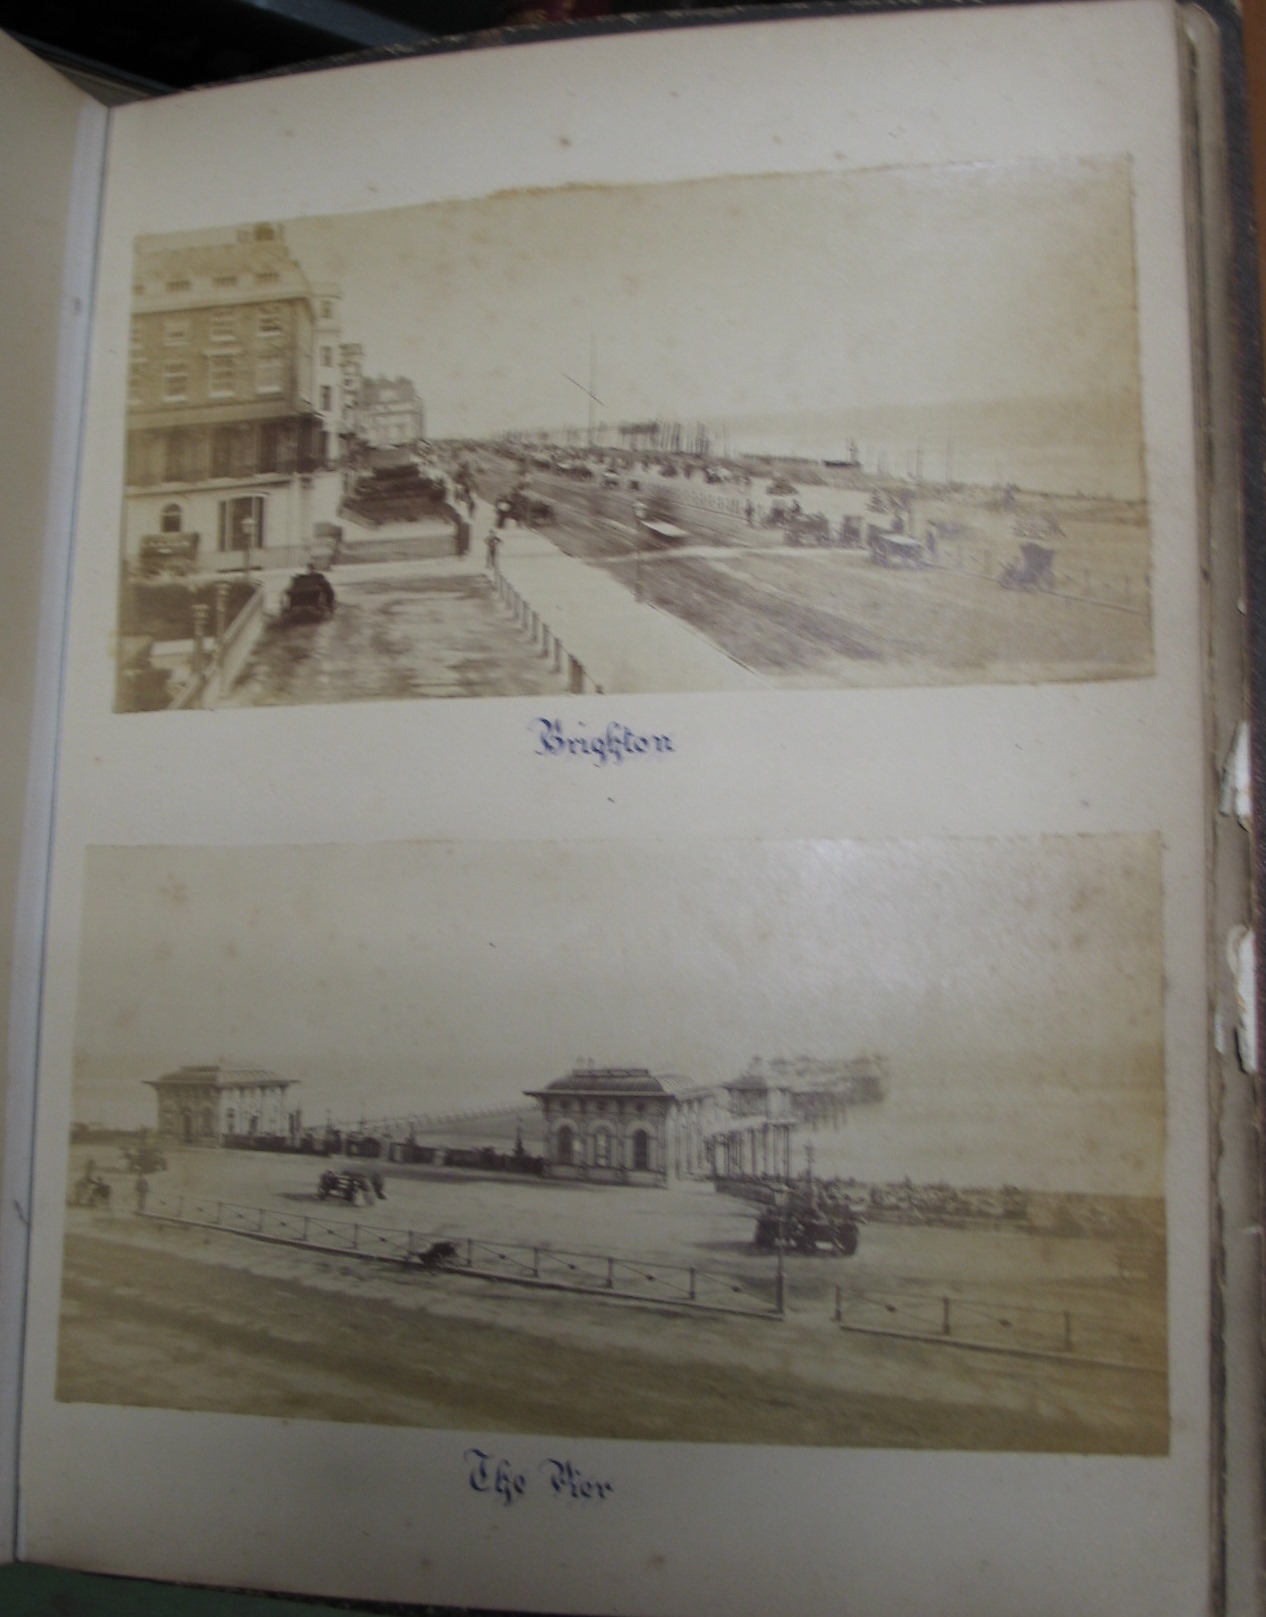 [PHOTOGRAPH] 19th c. 4to album with mounted photos, Europe & UK.